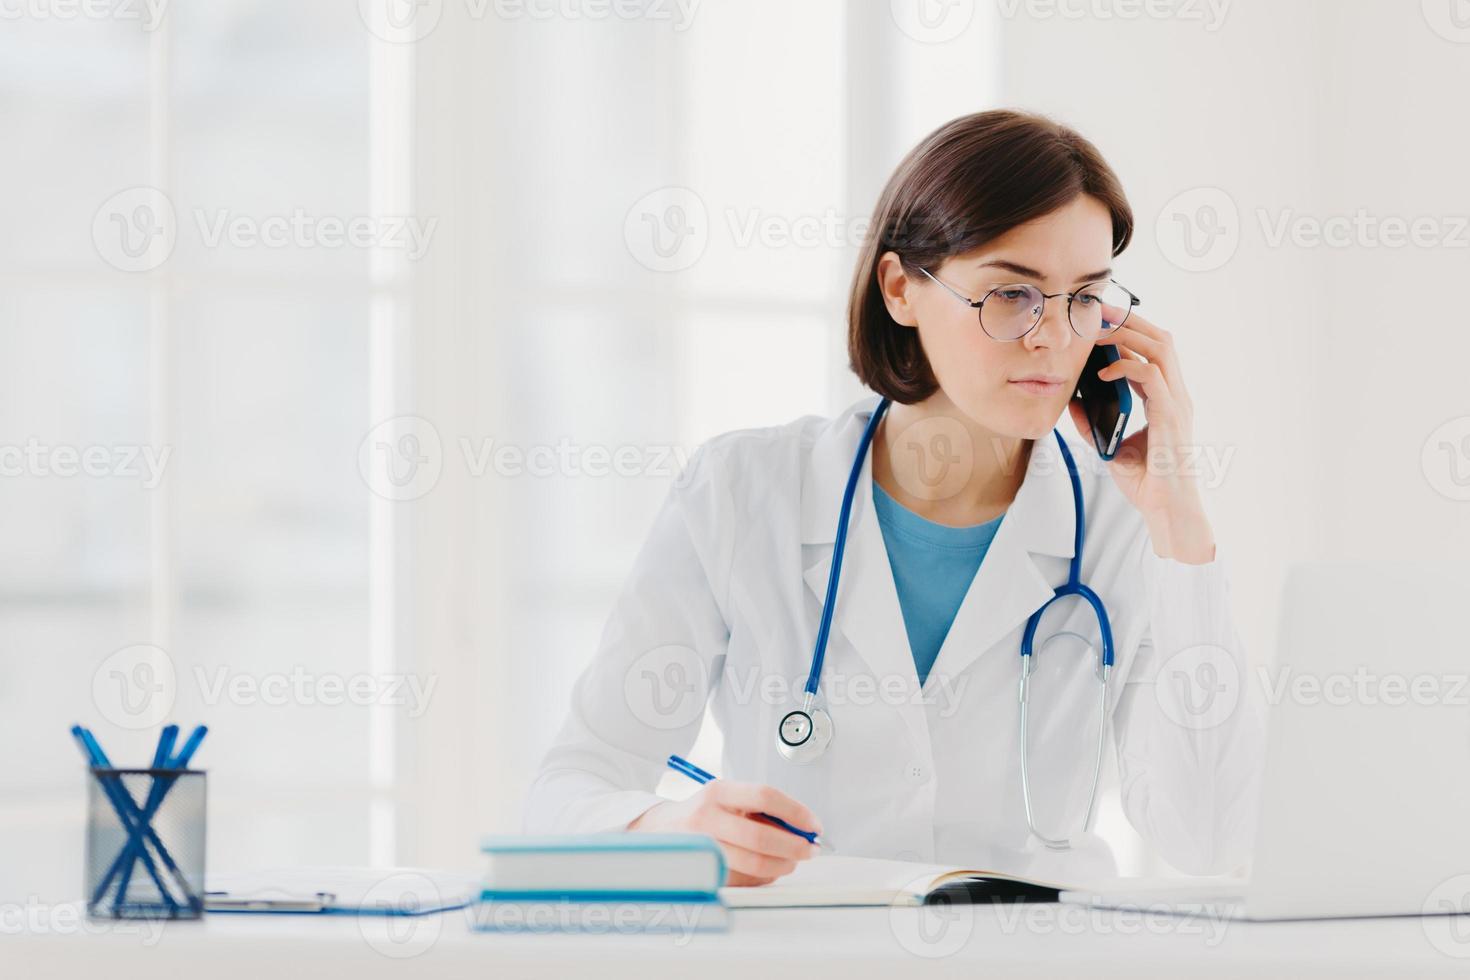 Heathcare personnel, medicine concept. Serious brunette female doctor focused at modern laptop computer, rewrites necessary information, talks on mobile phone, calls someone, has serious look photo